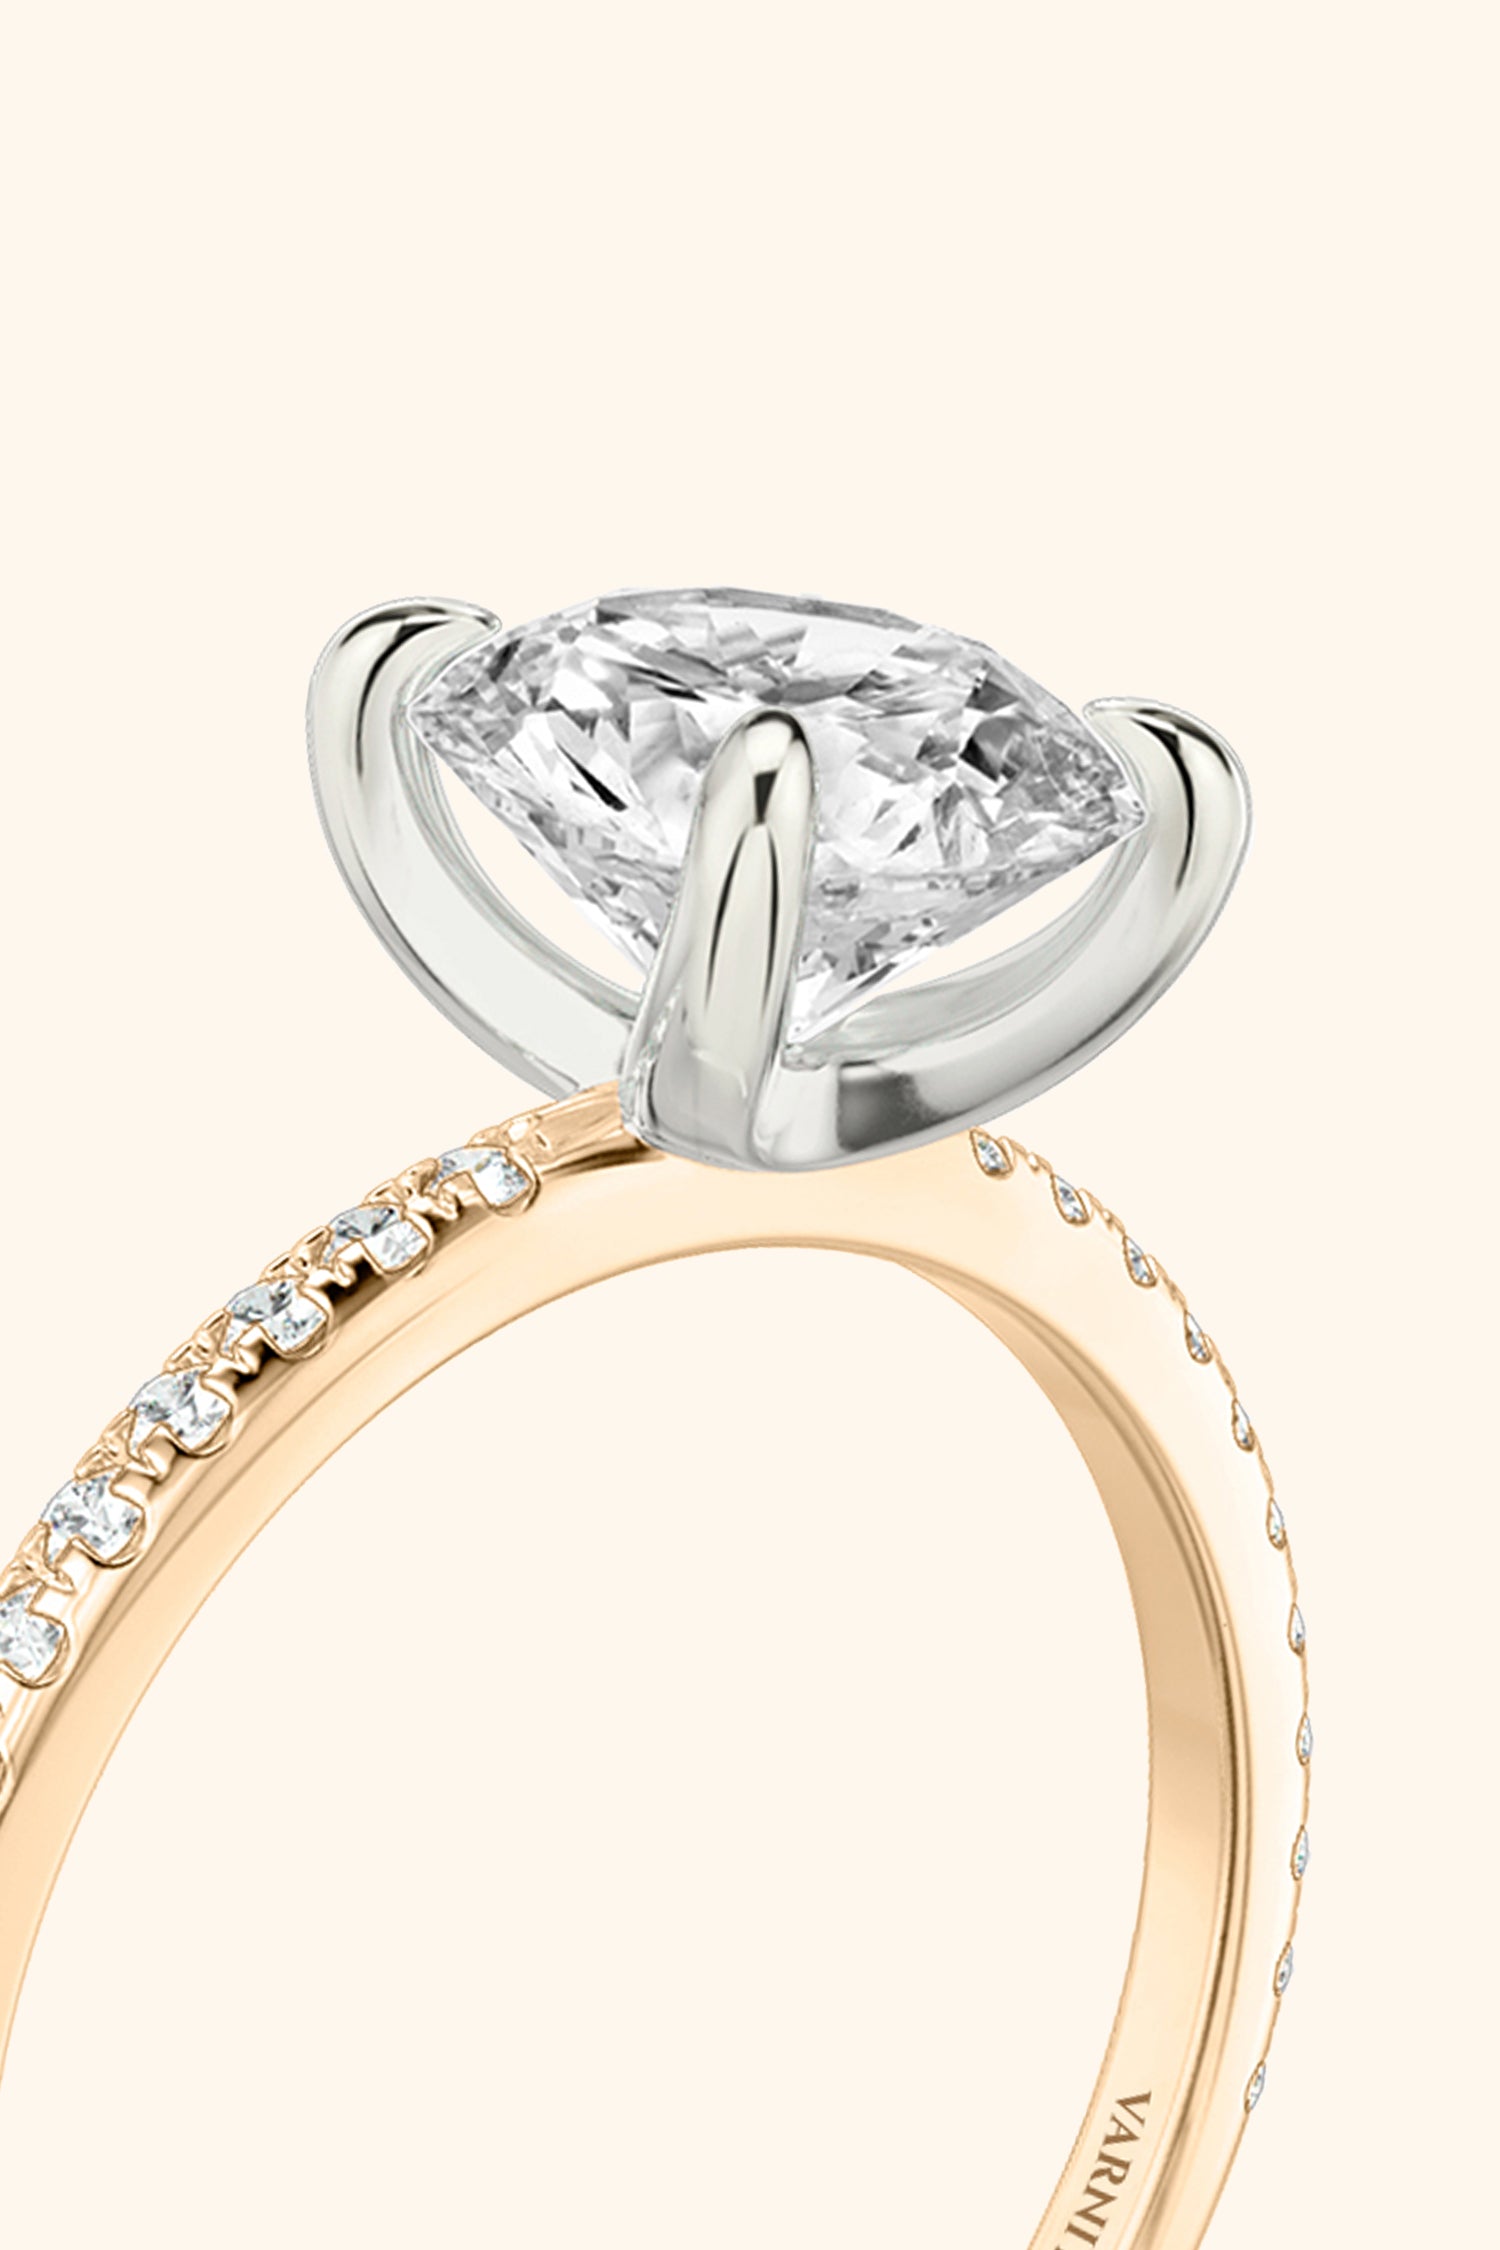 Dual Tone Glance Pave Ring with 2 Carat Round Brilliant Solitaire